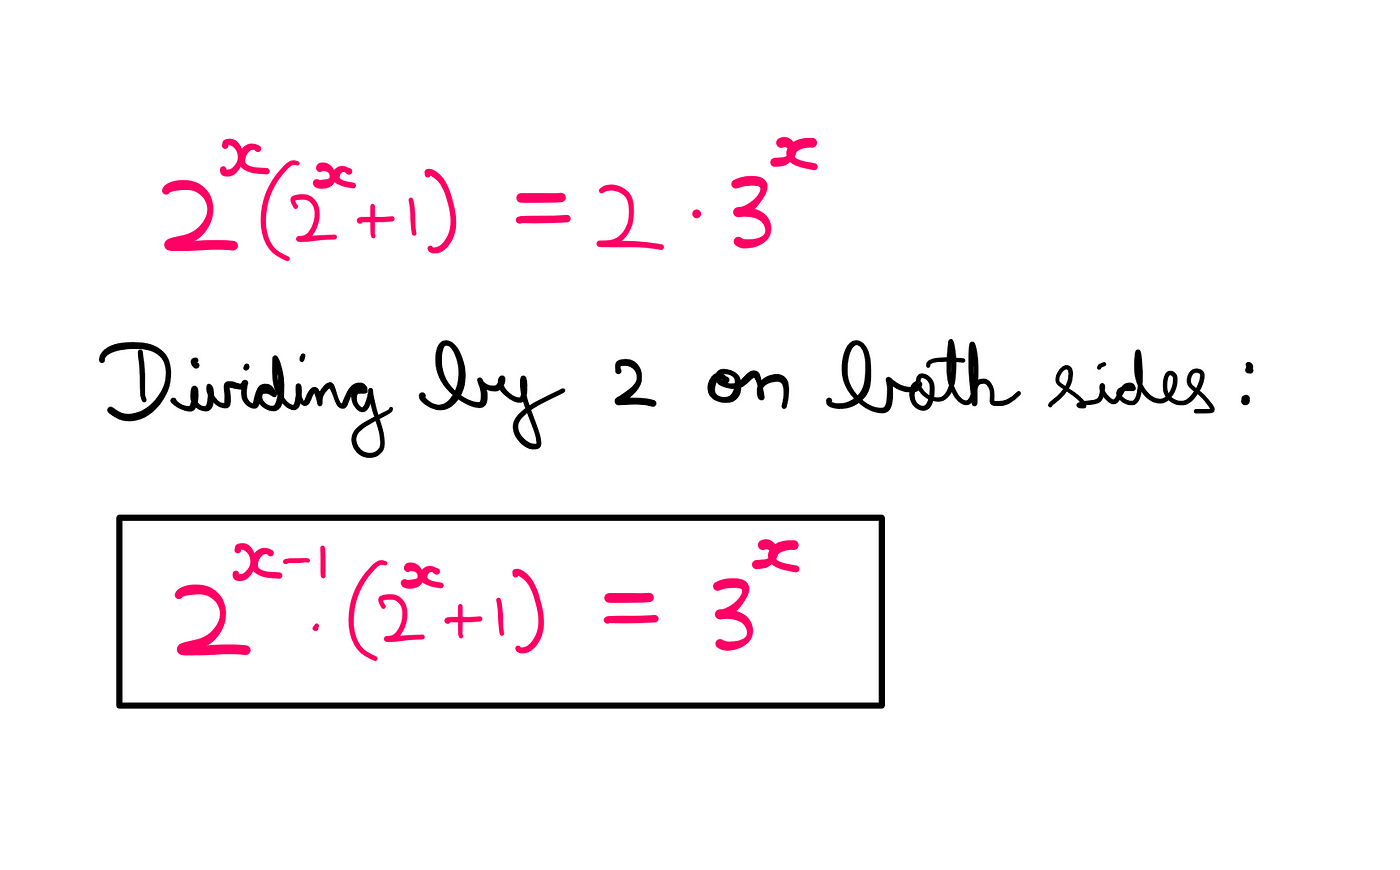 How To Really Solve This Tricky Algebra Problem? (II) — 2^x*(2^x+1) = 2*3^x; Dividing by 2 on both sides → 2^(x-1)*(2^x+1) = 3^x